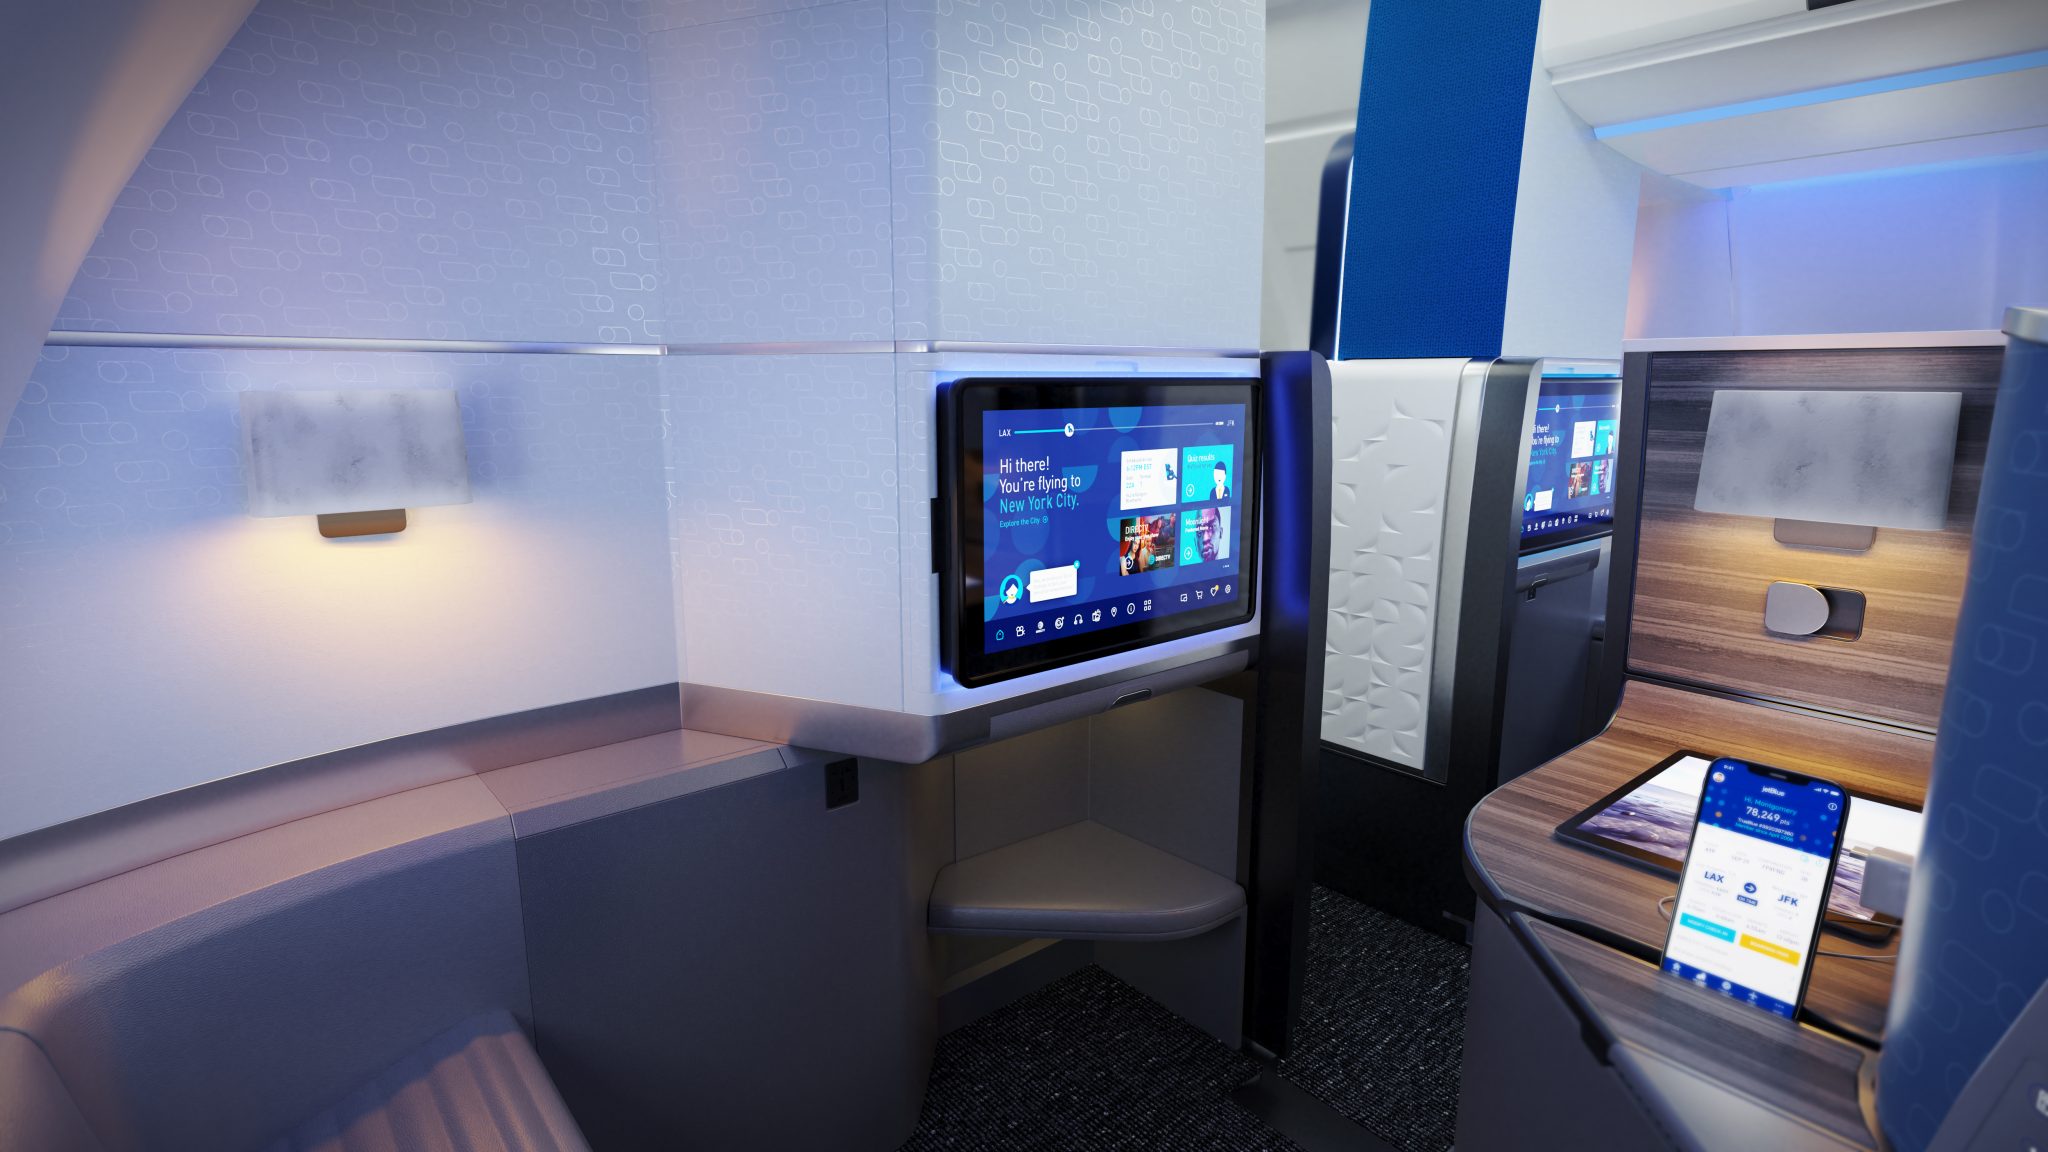 Image of planned Mint class studio seat for JetBlue's planned transatlantic service. JetBlue Airways sees wants to add a business line: travel technology, said chief digital and technology officer Eash Sundaram.